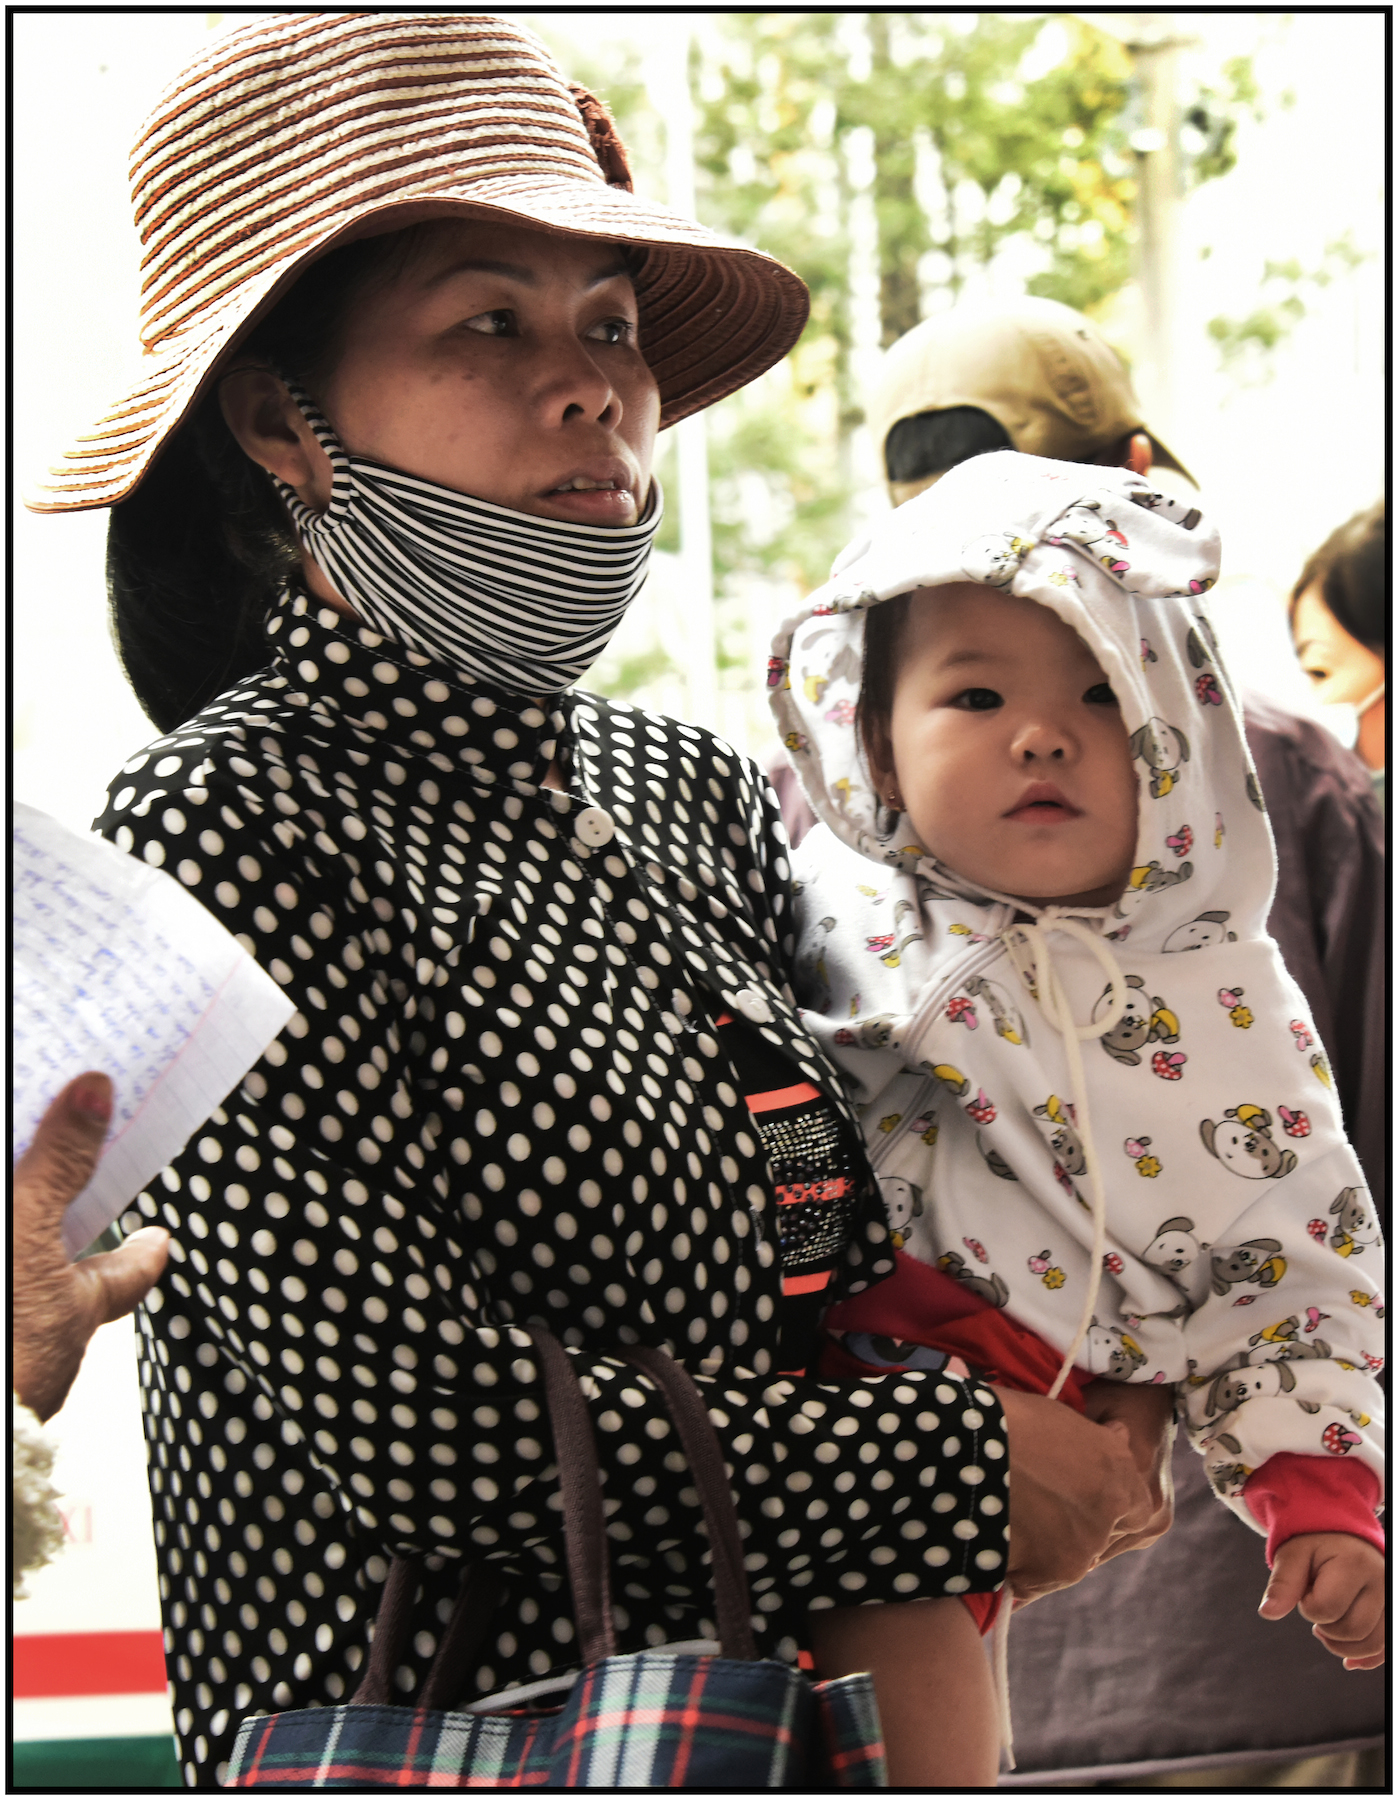  Woman with child wait outside Binh Tay Market, for merchendise she purchased, to be delivered to her vehicle, Binh Tay Market, Cholon, Saigon/HCMC, Dec. 2015 